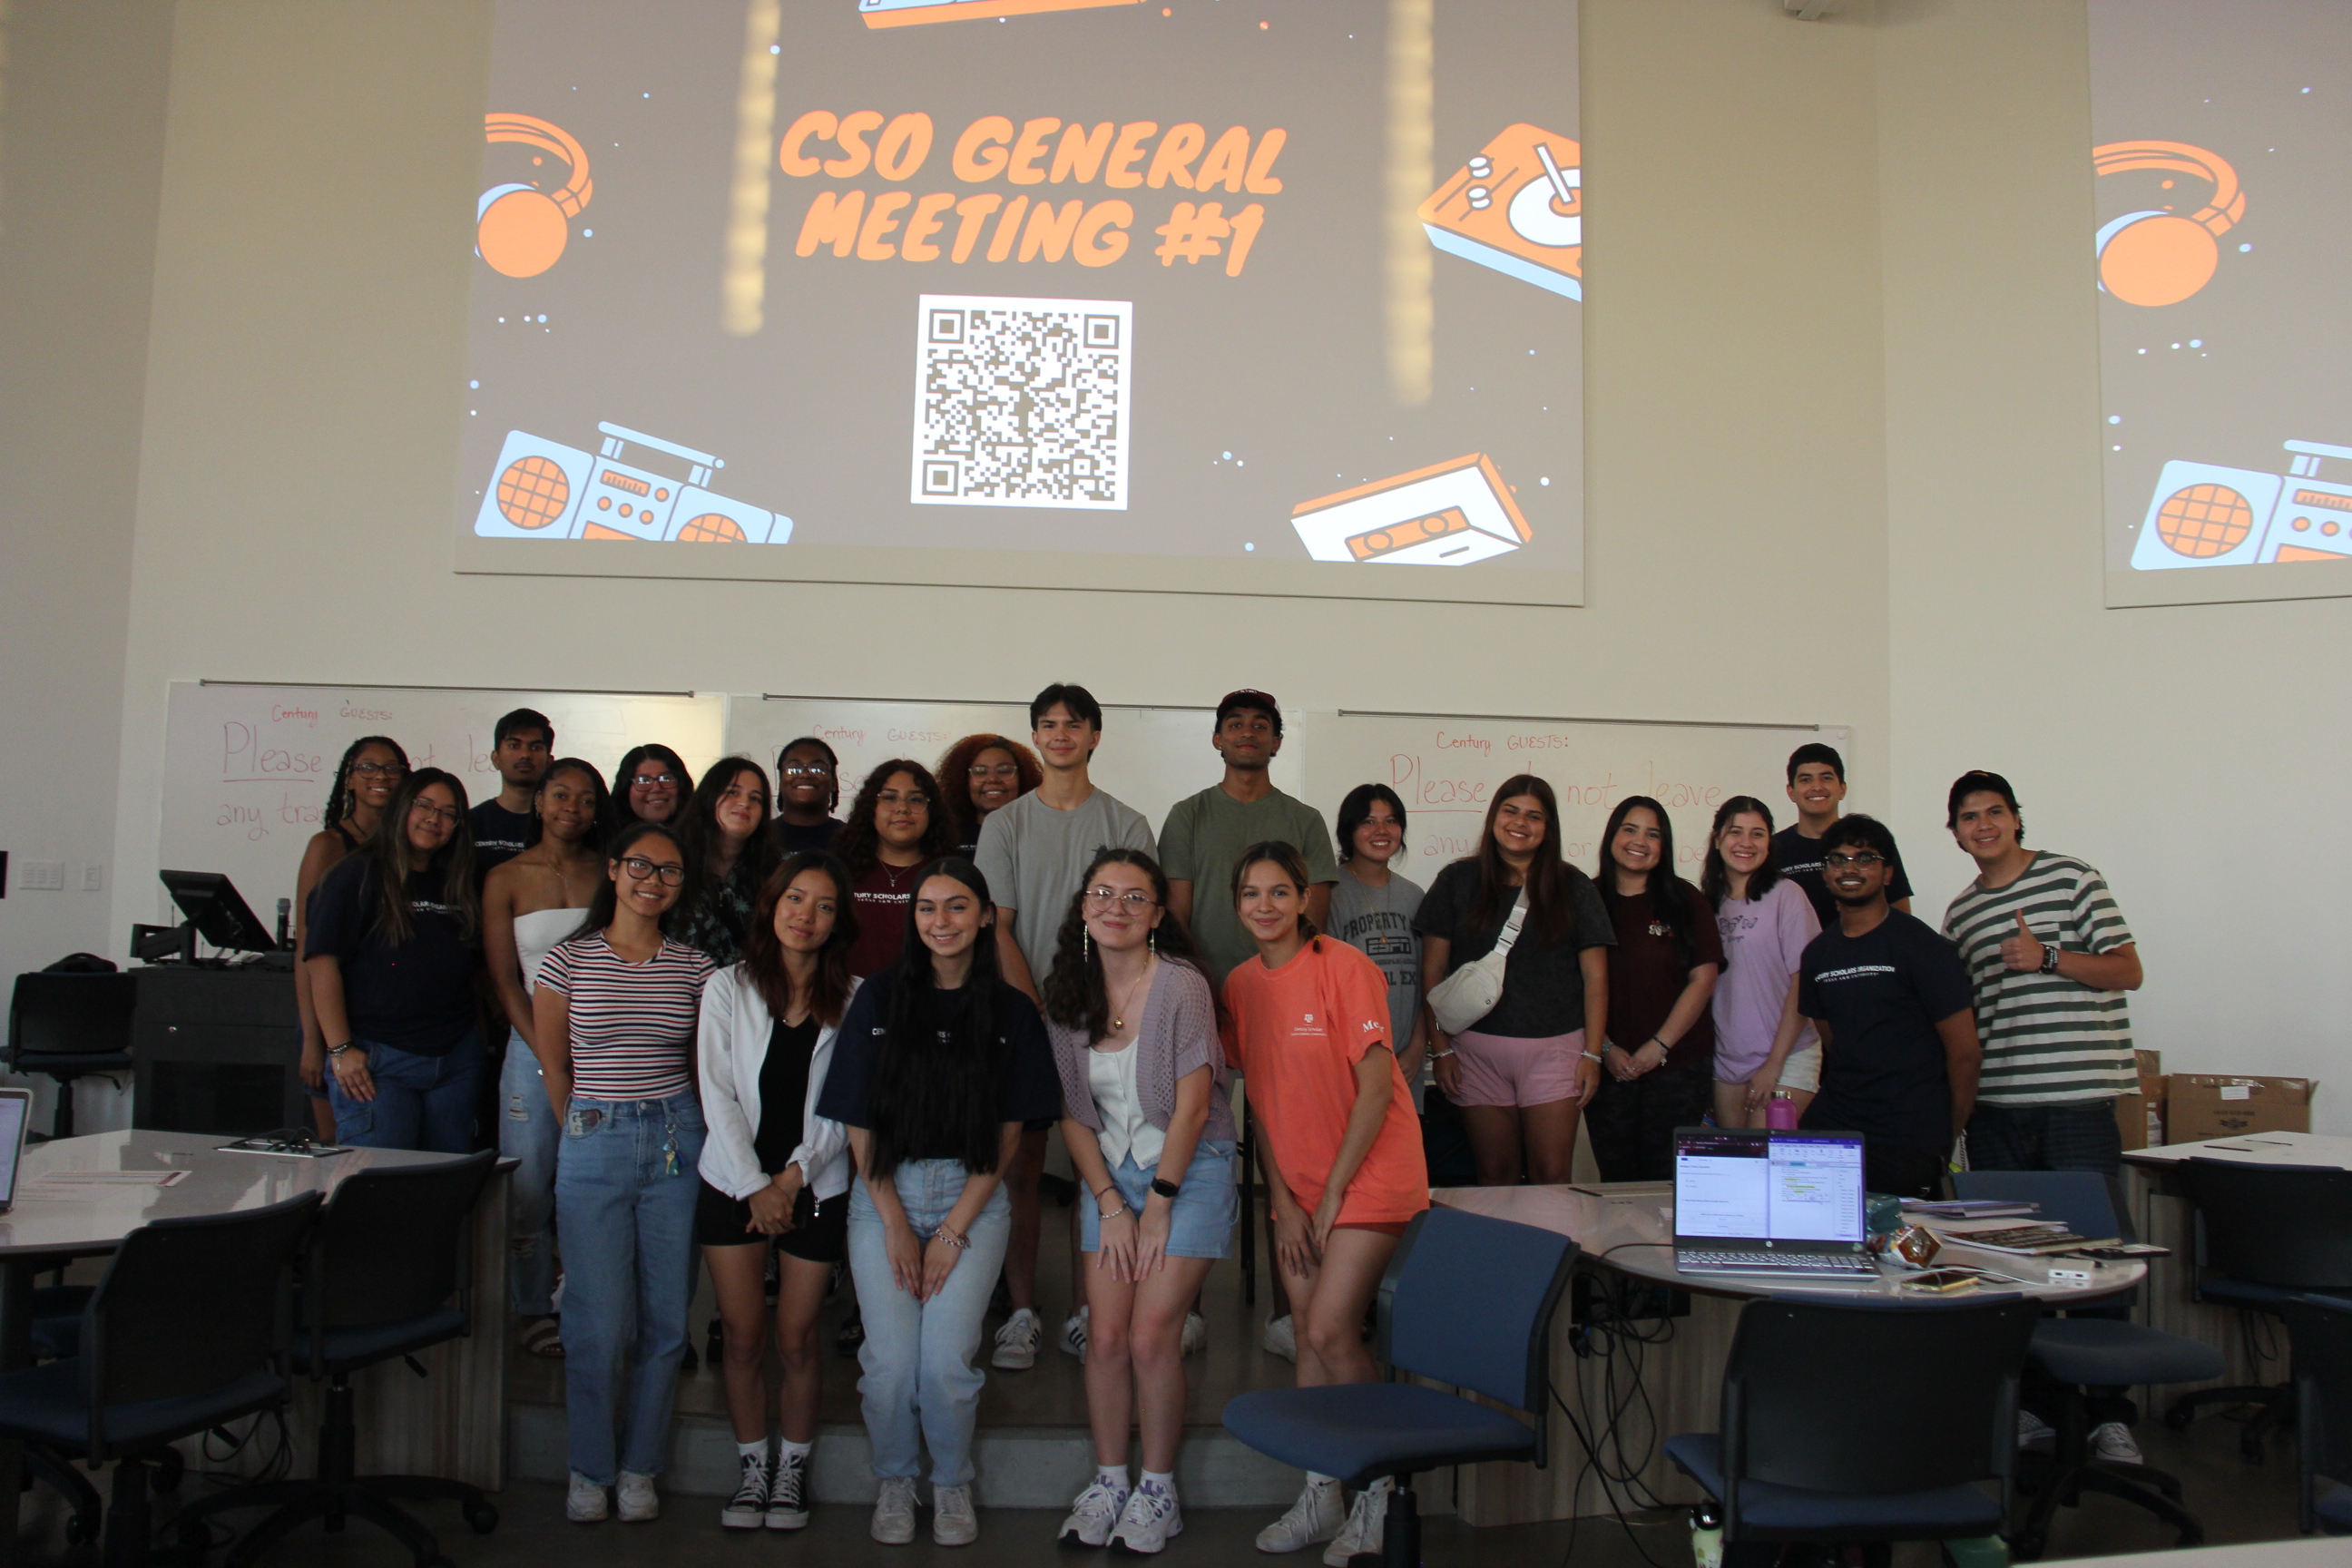 Century Scholars Organization members smiling together in a classroom during their first general member meeting of 2023.